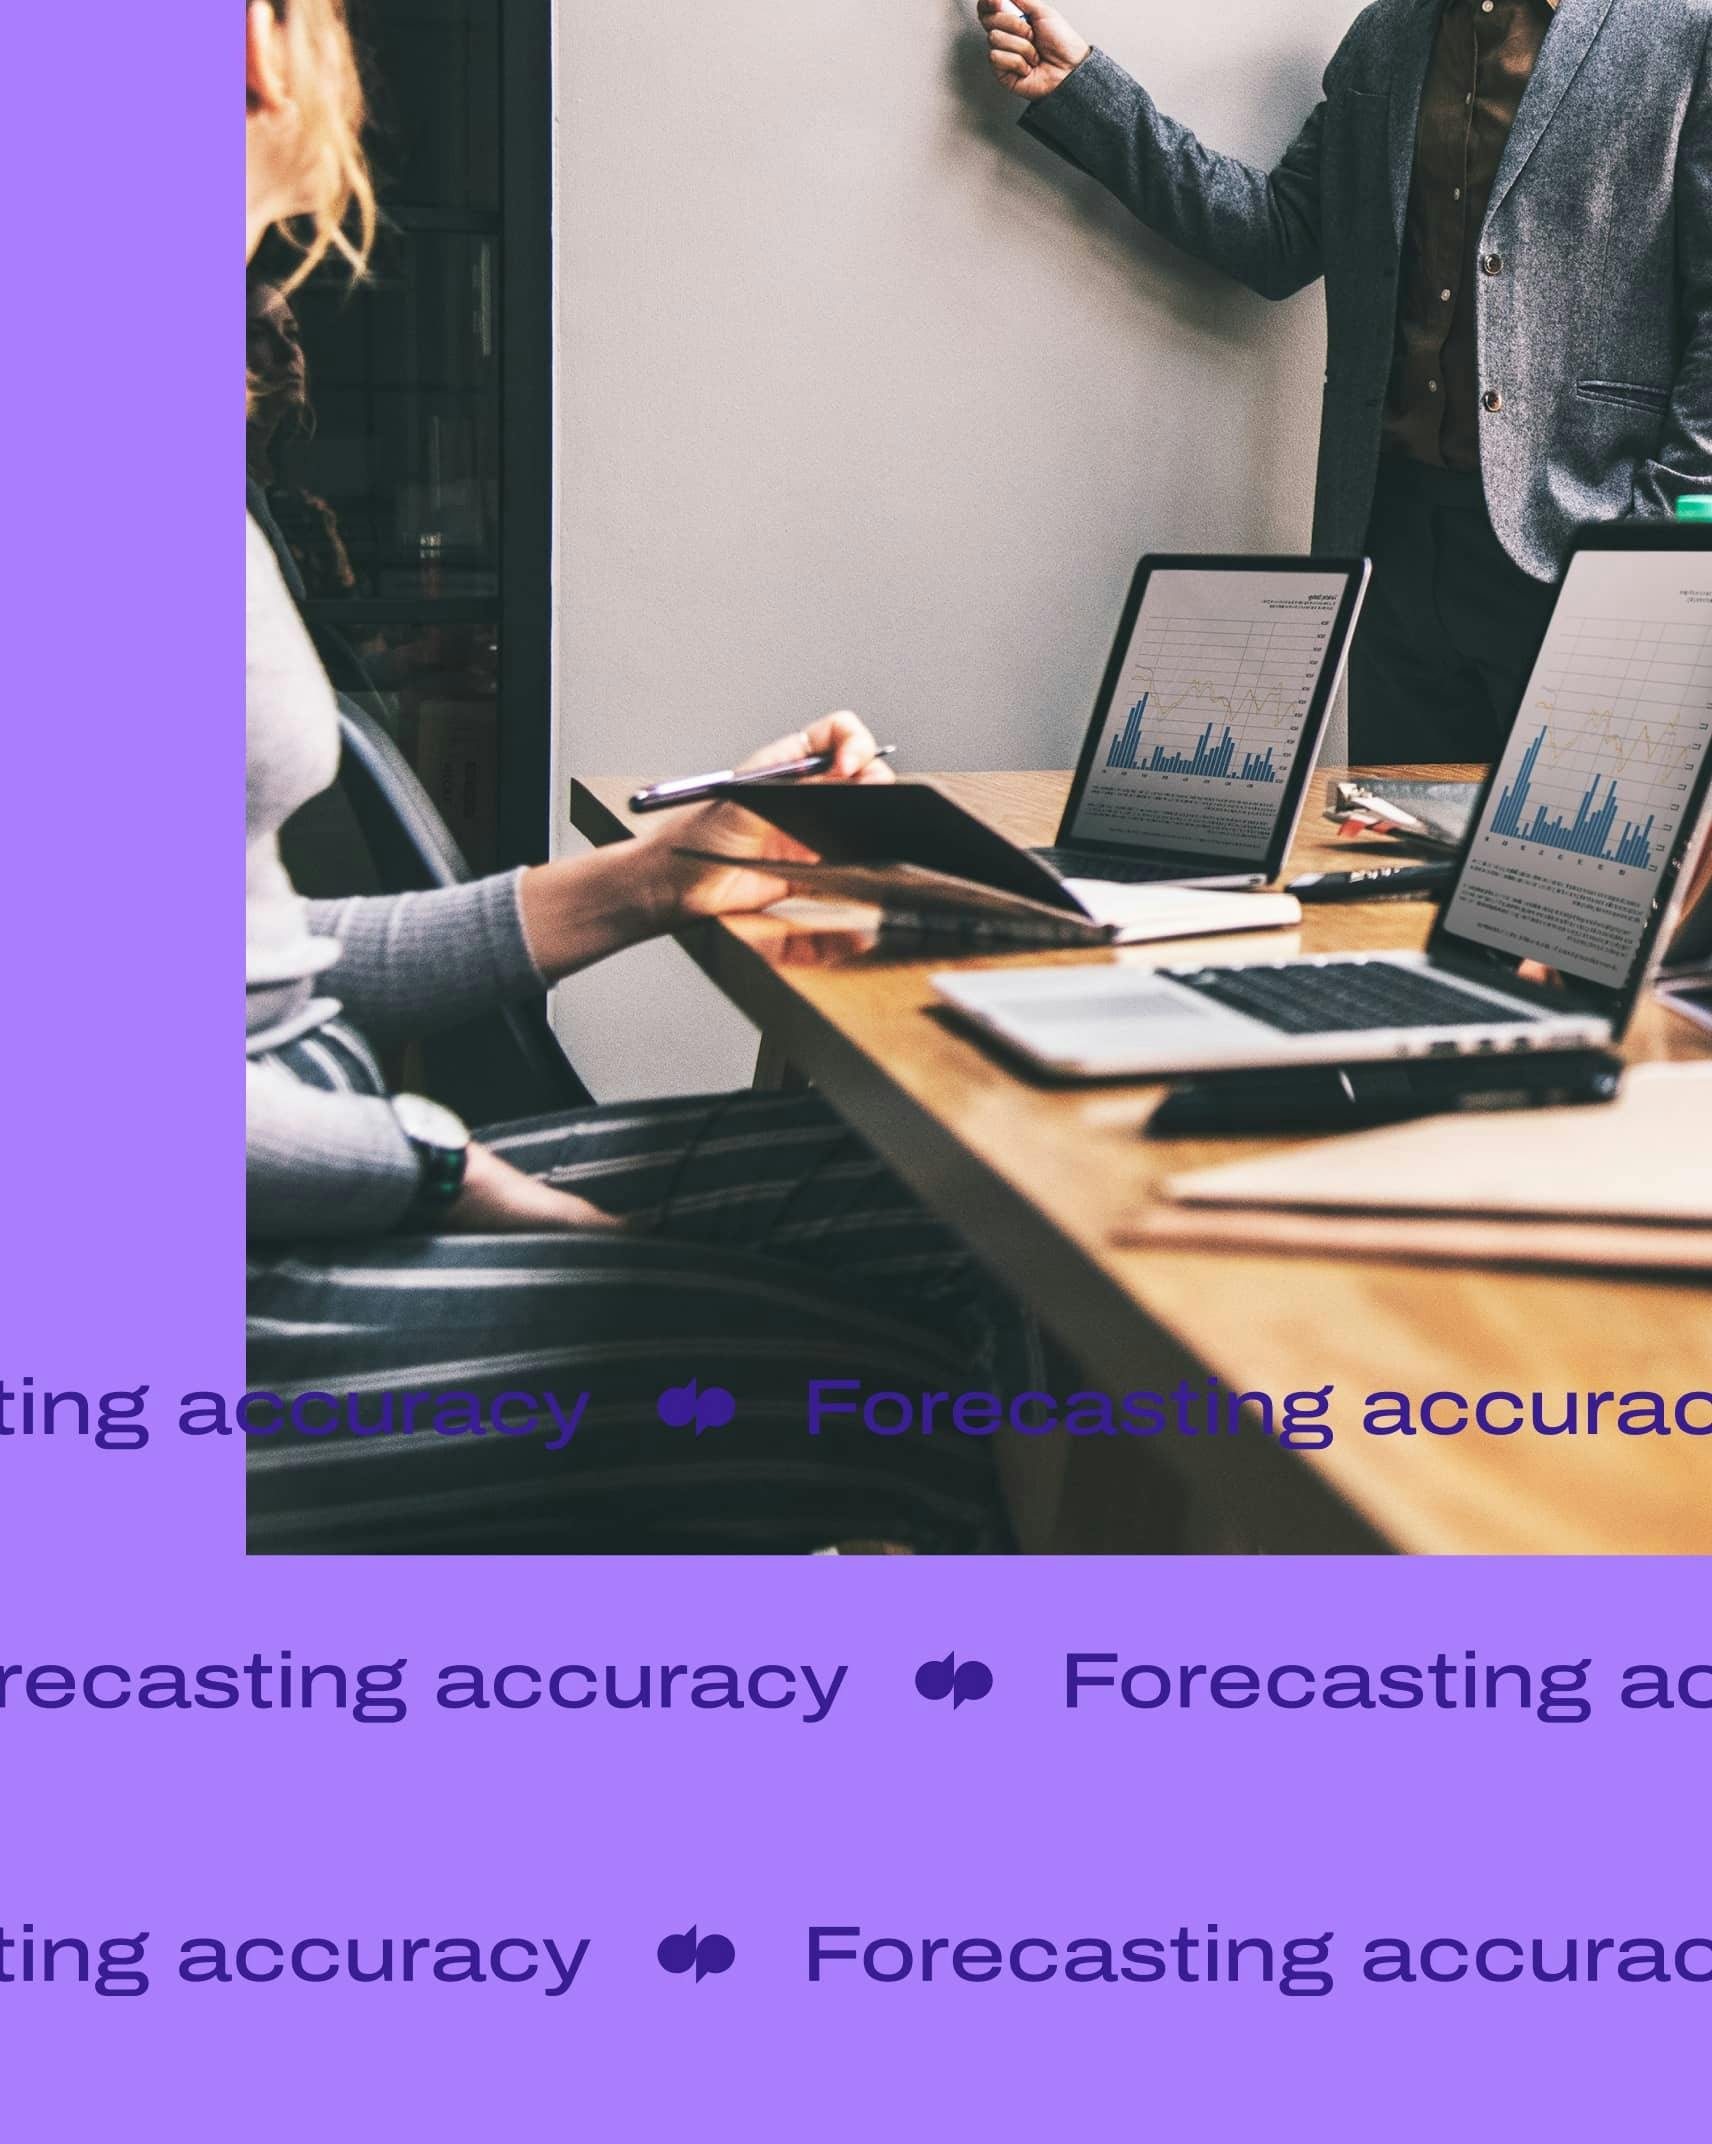 Forecasting accuracy